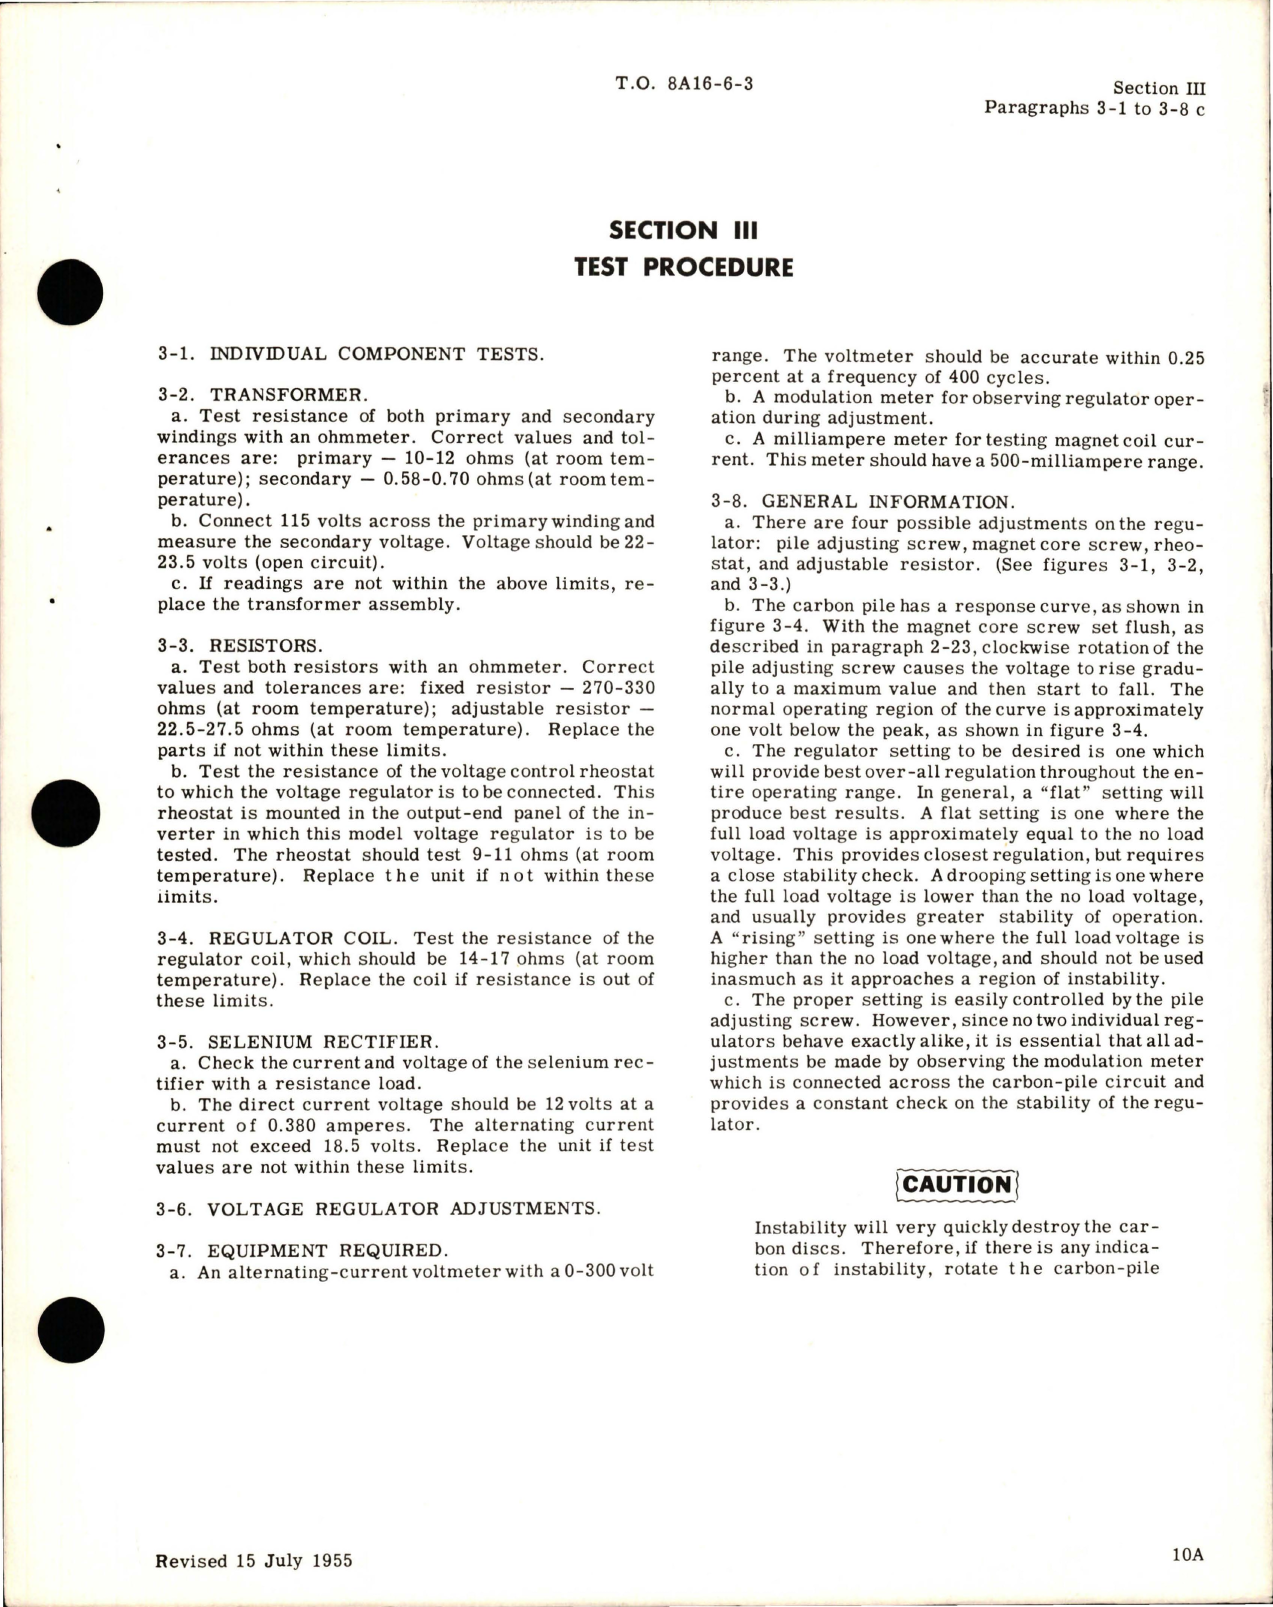 Sample page 5 from AirCorps Library document: Overhaul Instructions for Voltage Regulators - Models F36-70, F45-51, F45-90, F45-95, F47-99, F49-70, and JH12999-3 